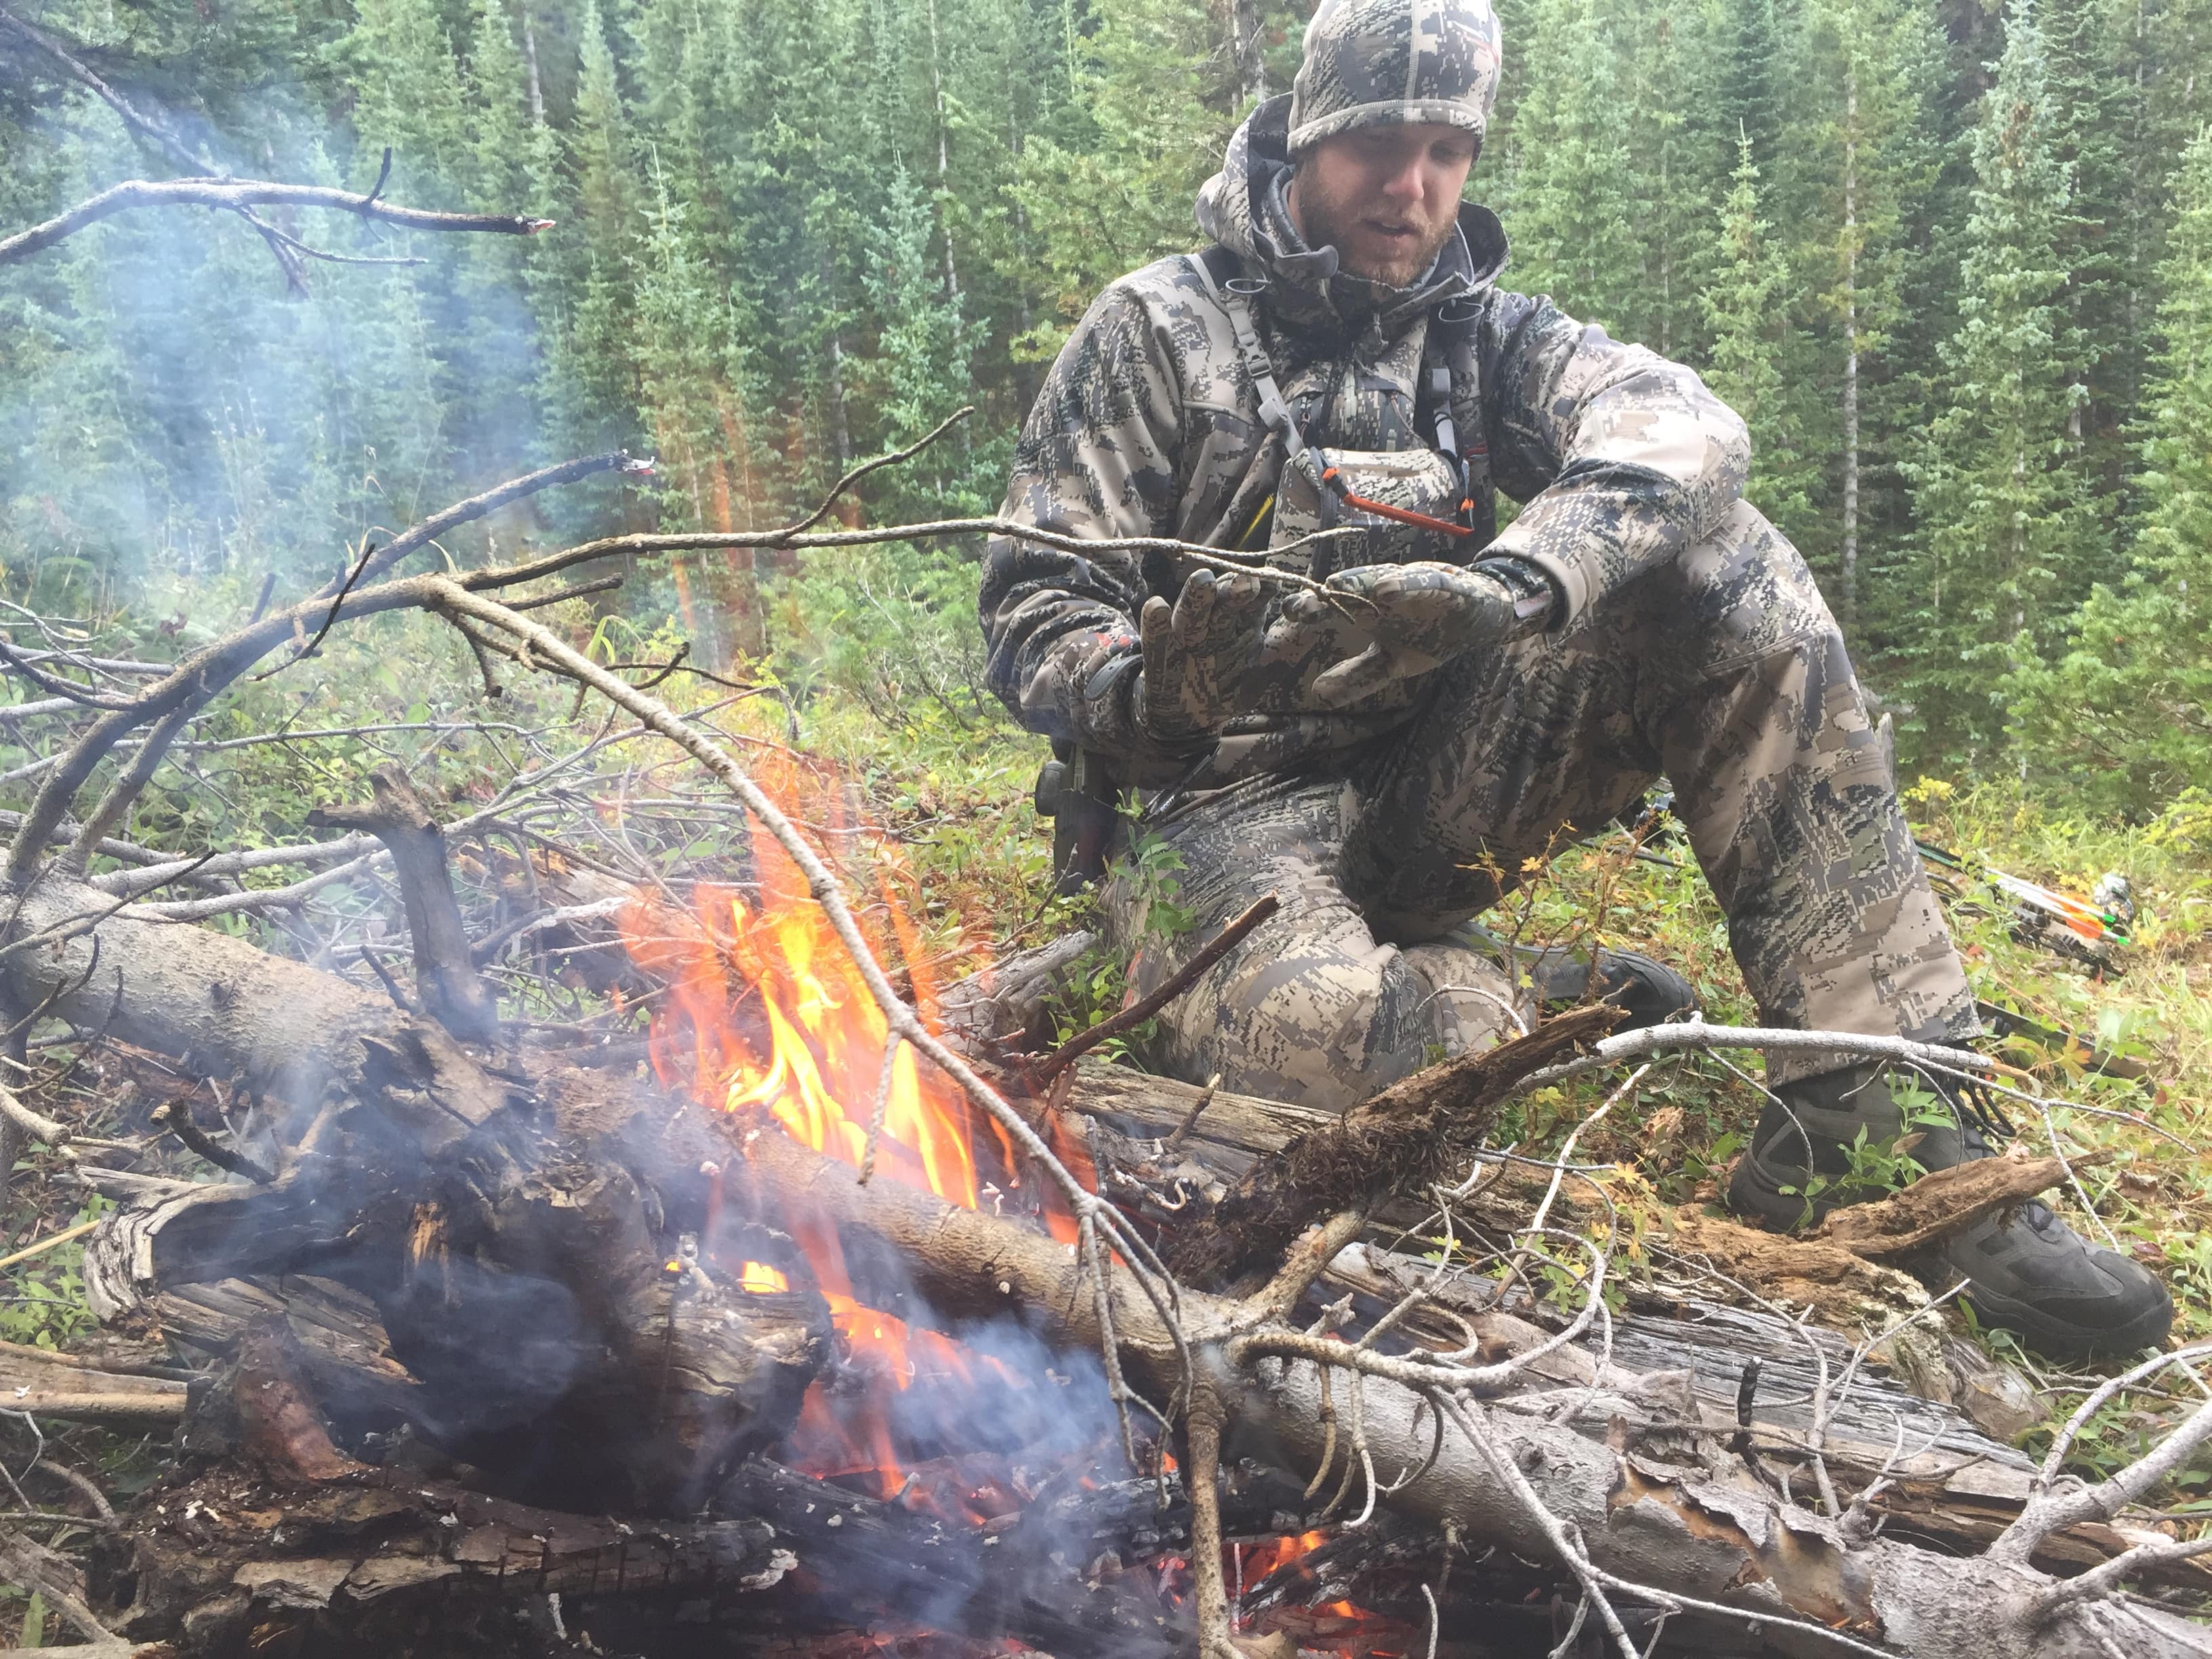 Making a fire while hunting